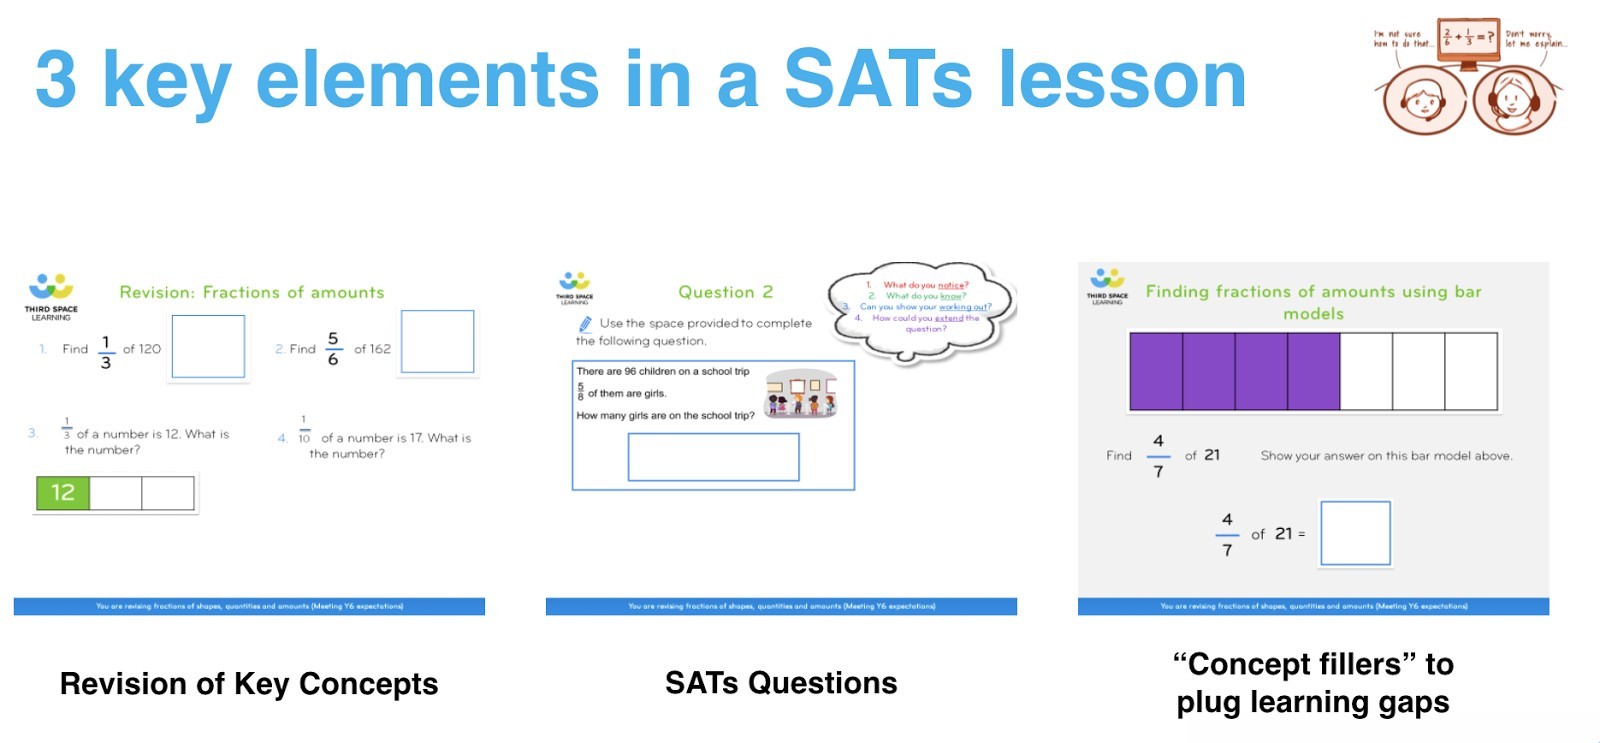 The three aspects of a Third Space Learning SATs lesson: revision, practice questions, and concept fillers to plug gaps